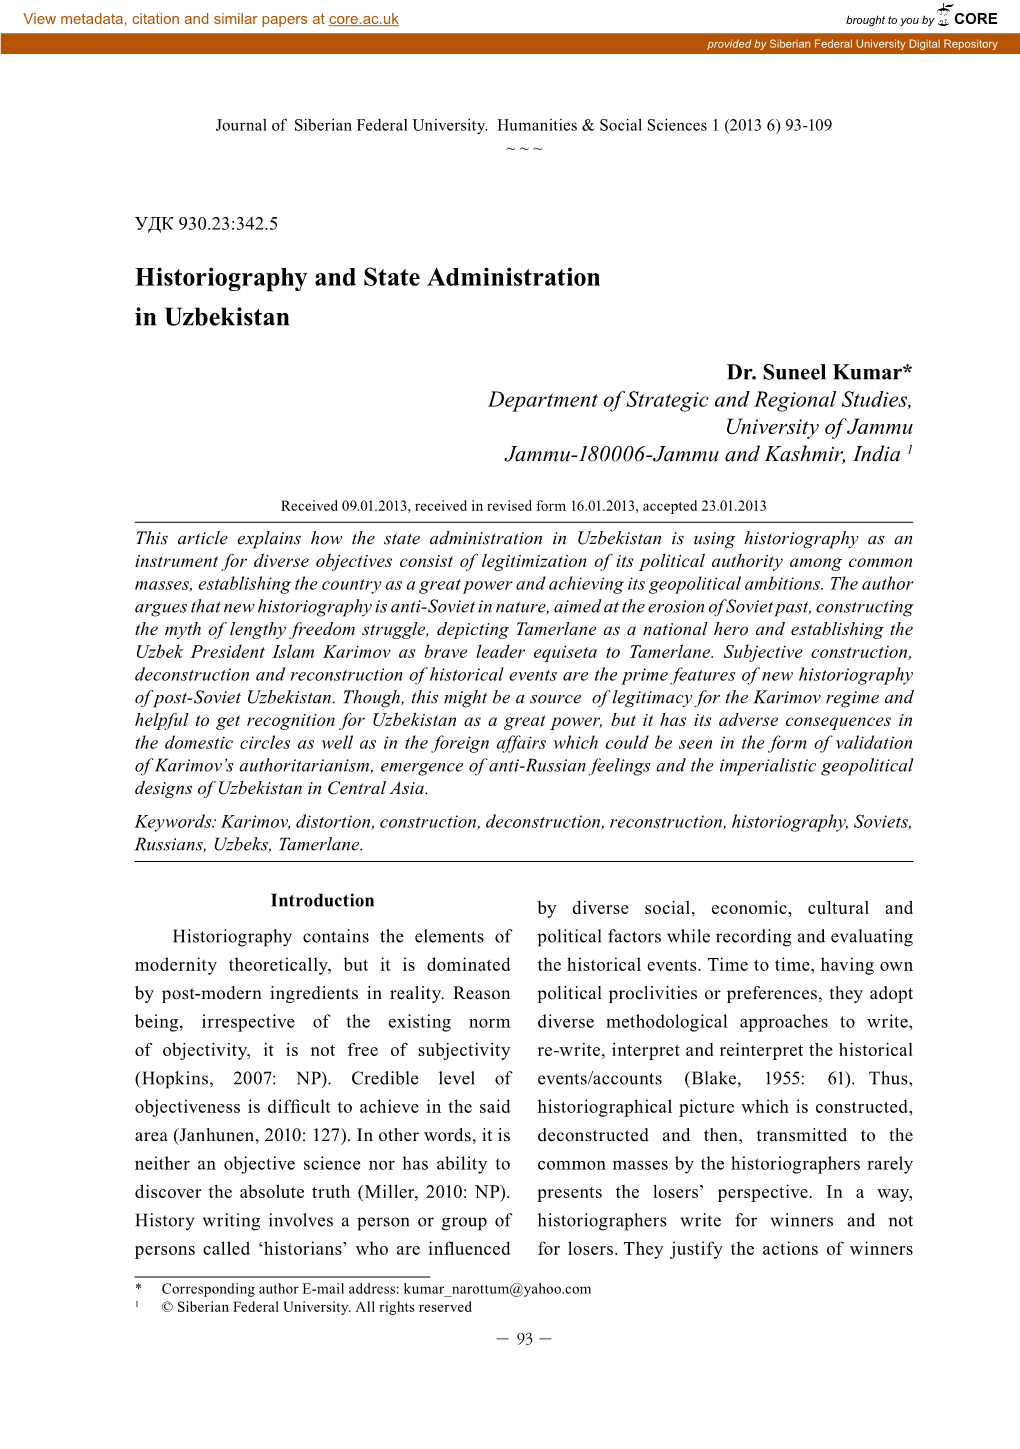 Historiography and State Administration in Uzbekistan